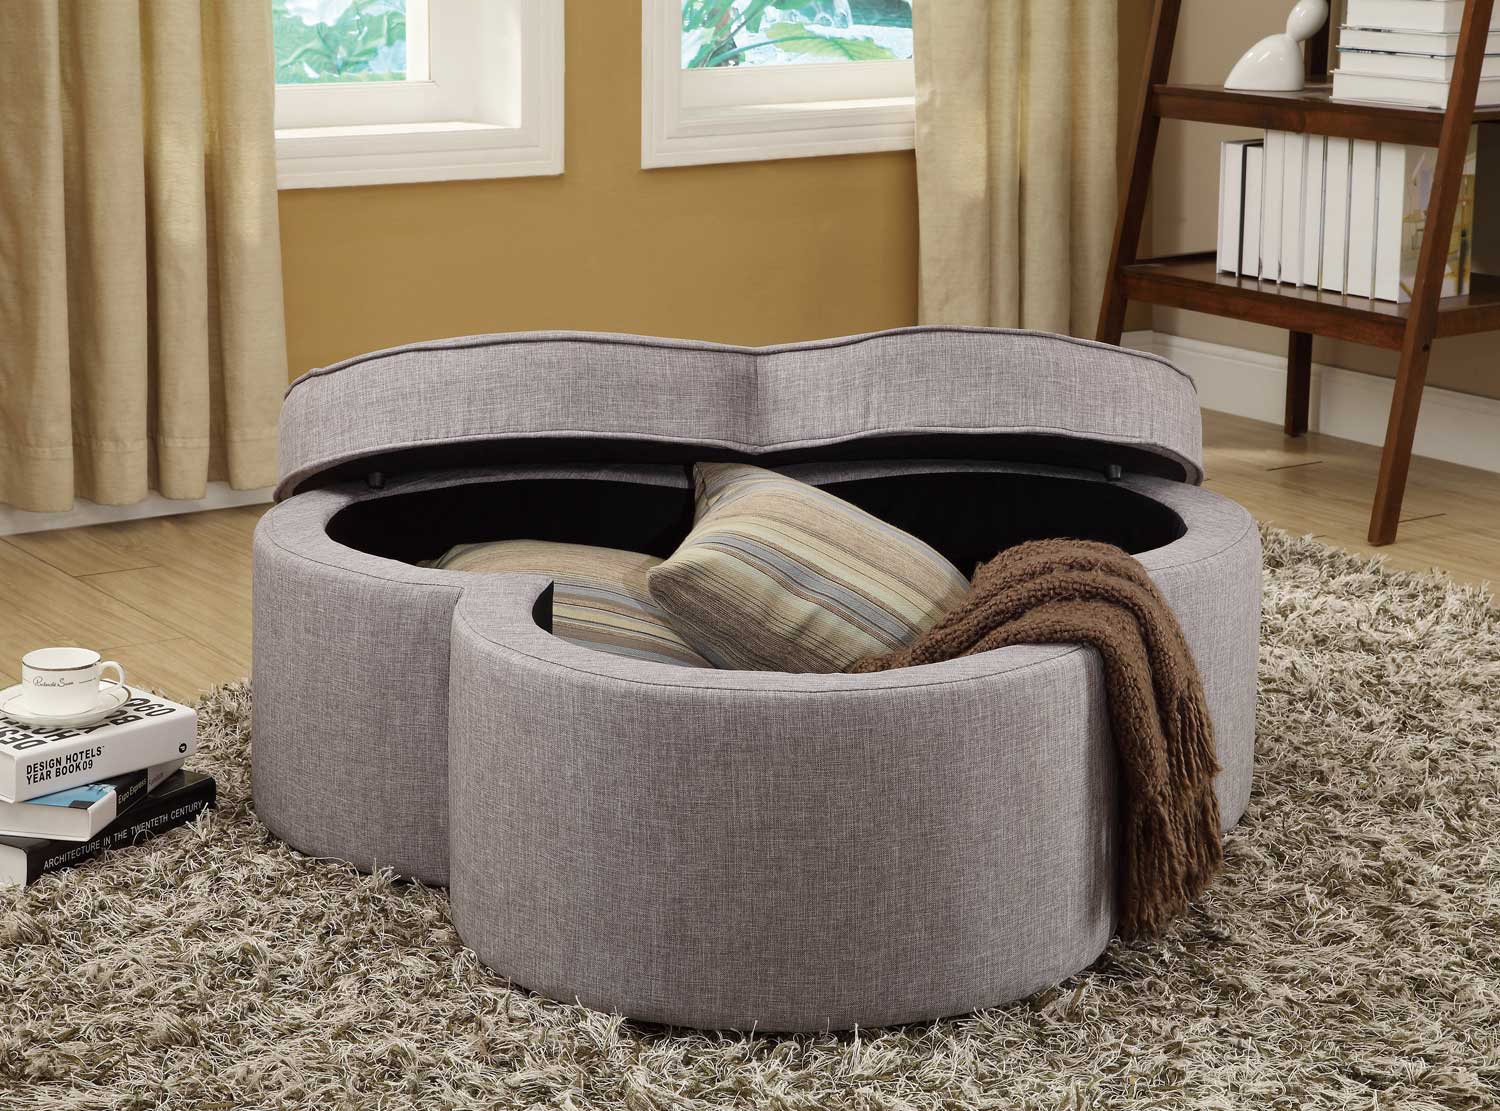 Homelegance Limerick Storage Ottoman with Casters - Grey Linen